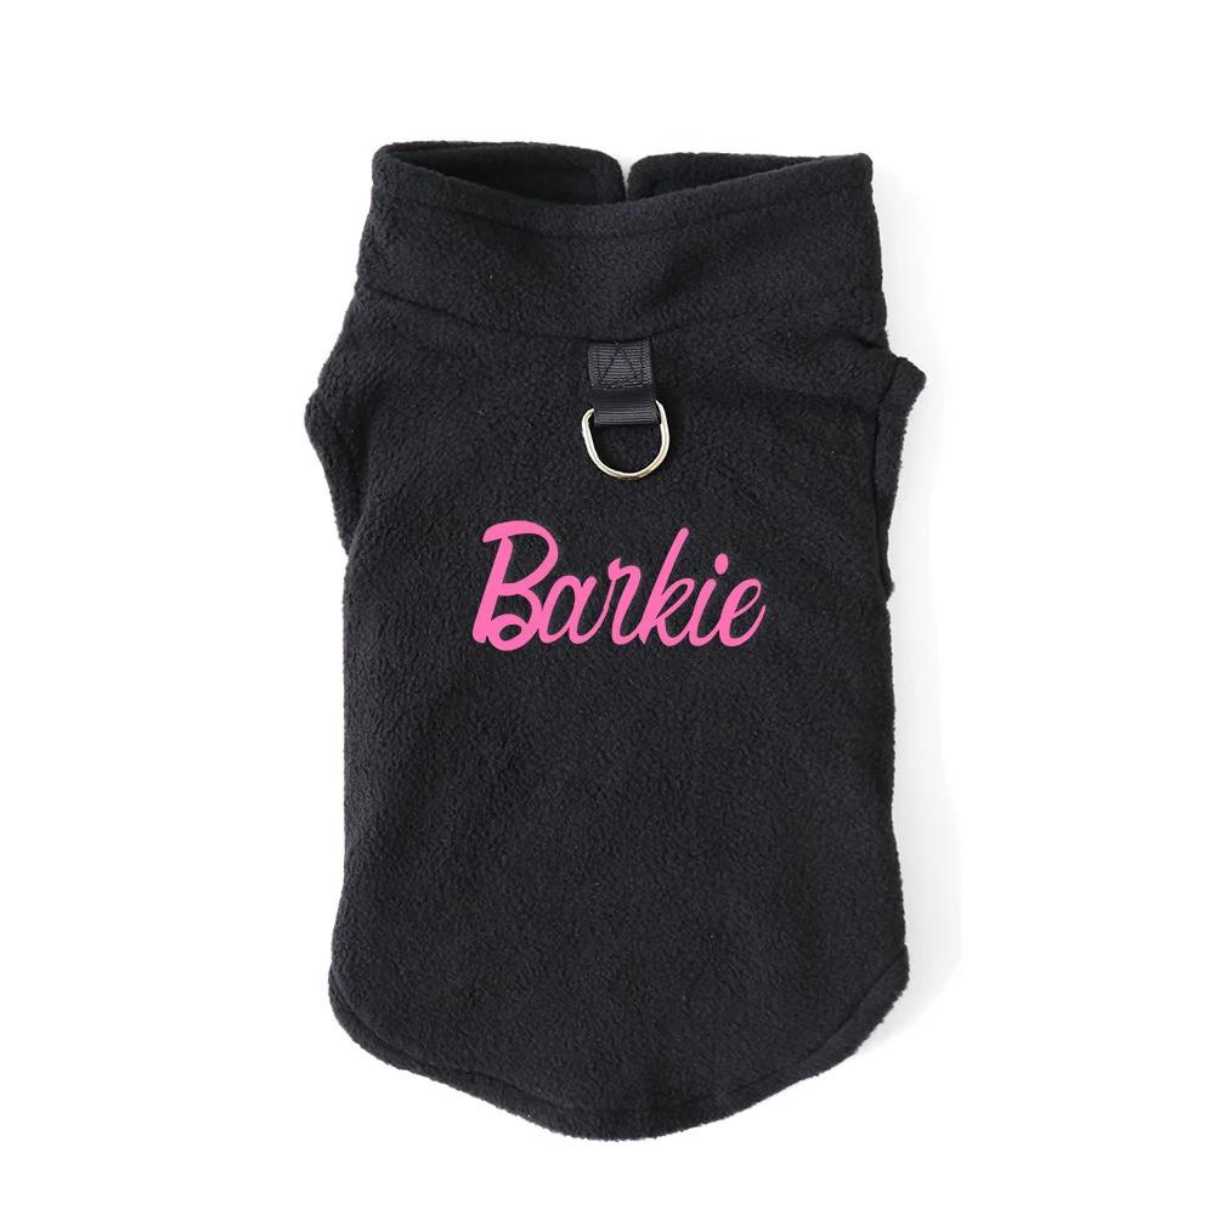 barkie dog vest, jacket, clothes comes in black with pink writing. Has a holder for the lead